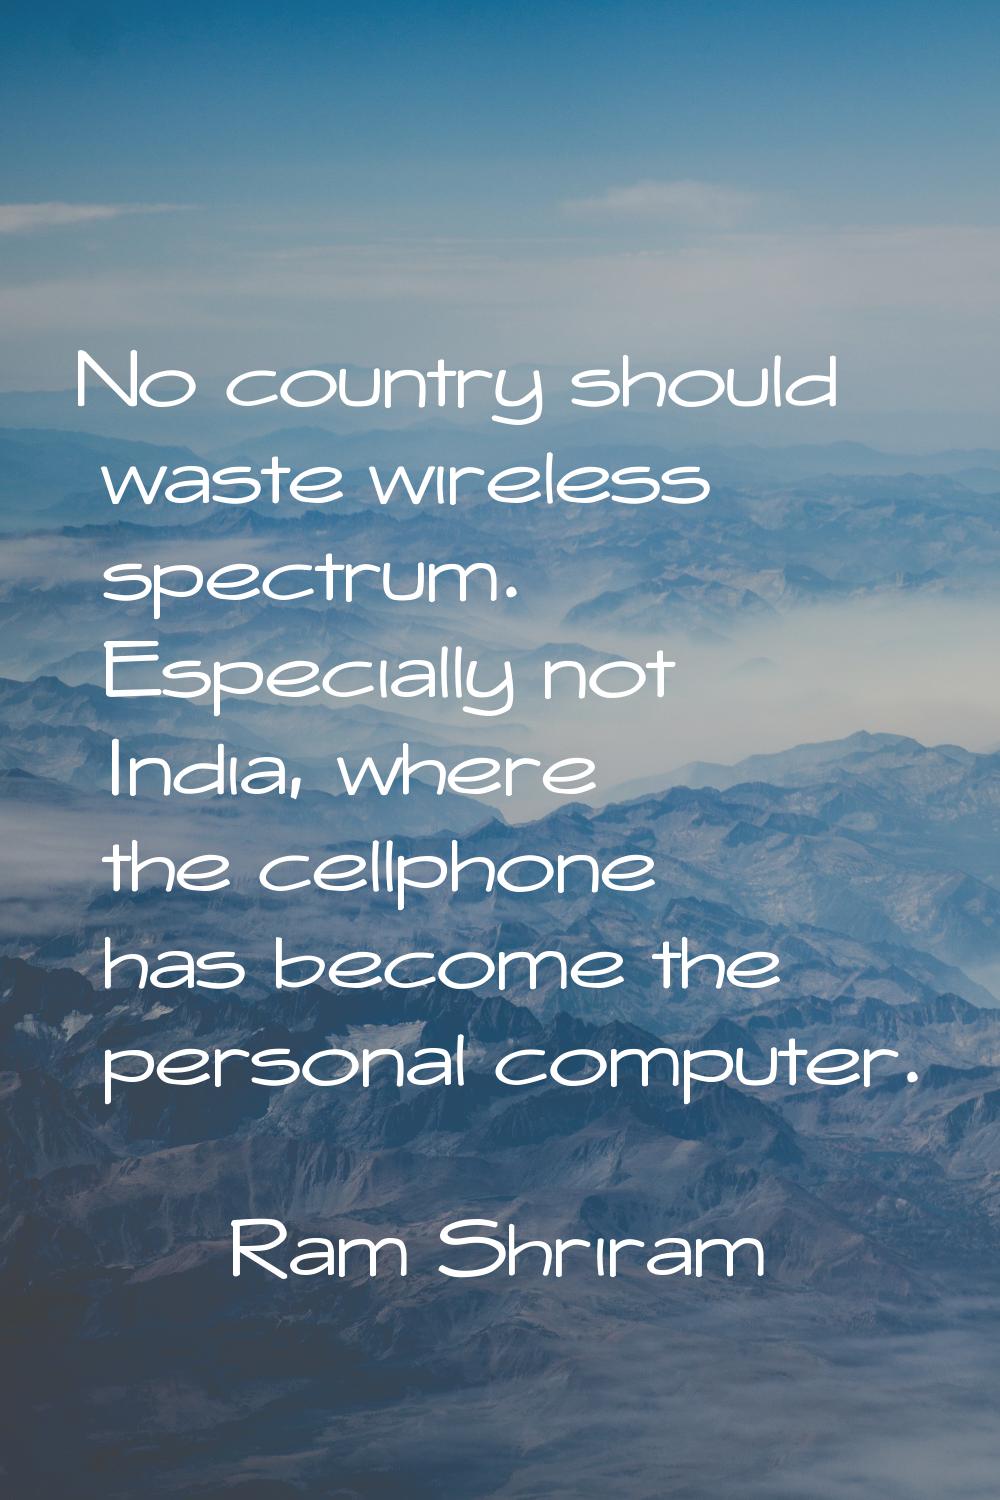 No country should waste wireless spectrum. Especially not India, where the cellphone has become the